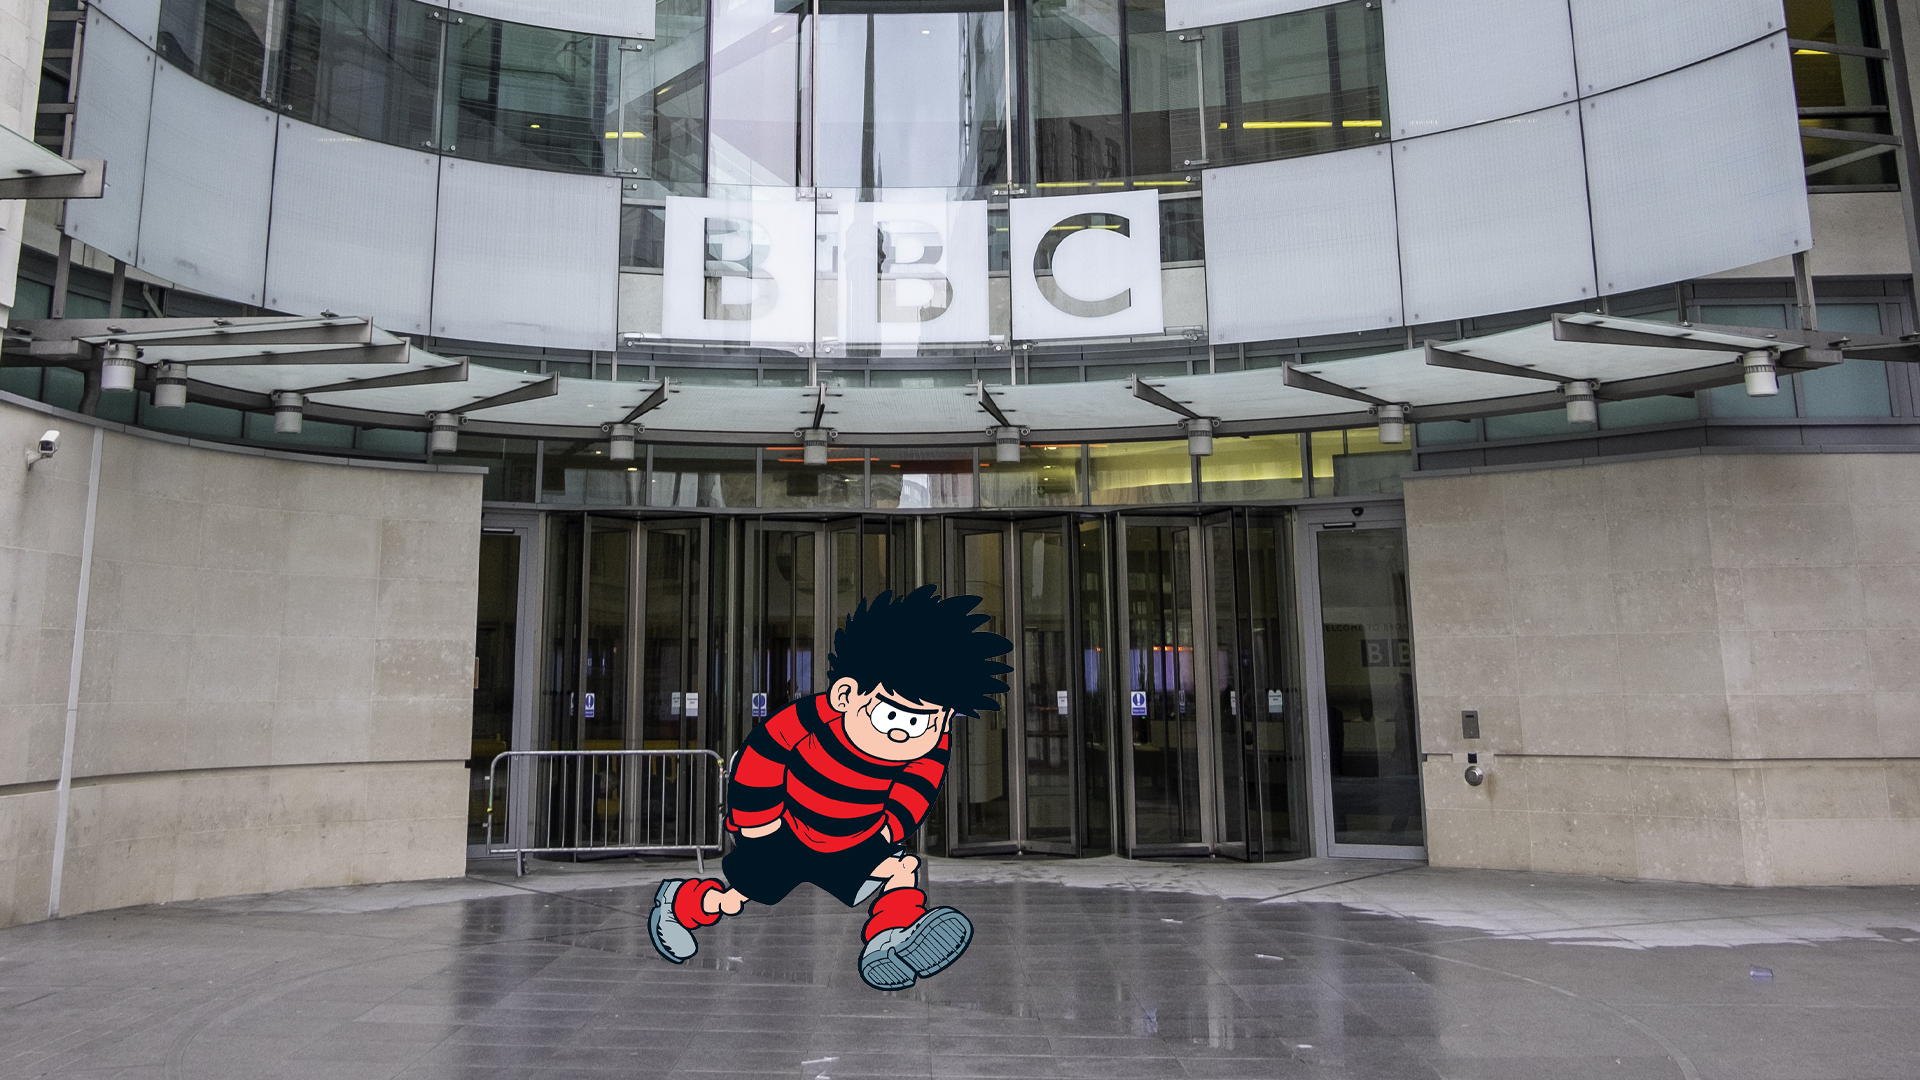 Dennis at the BBC in London